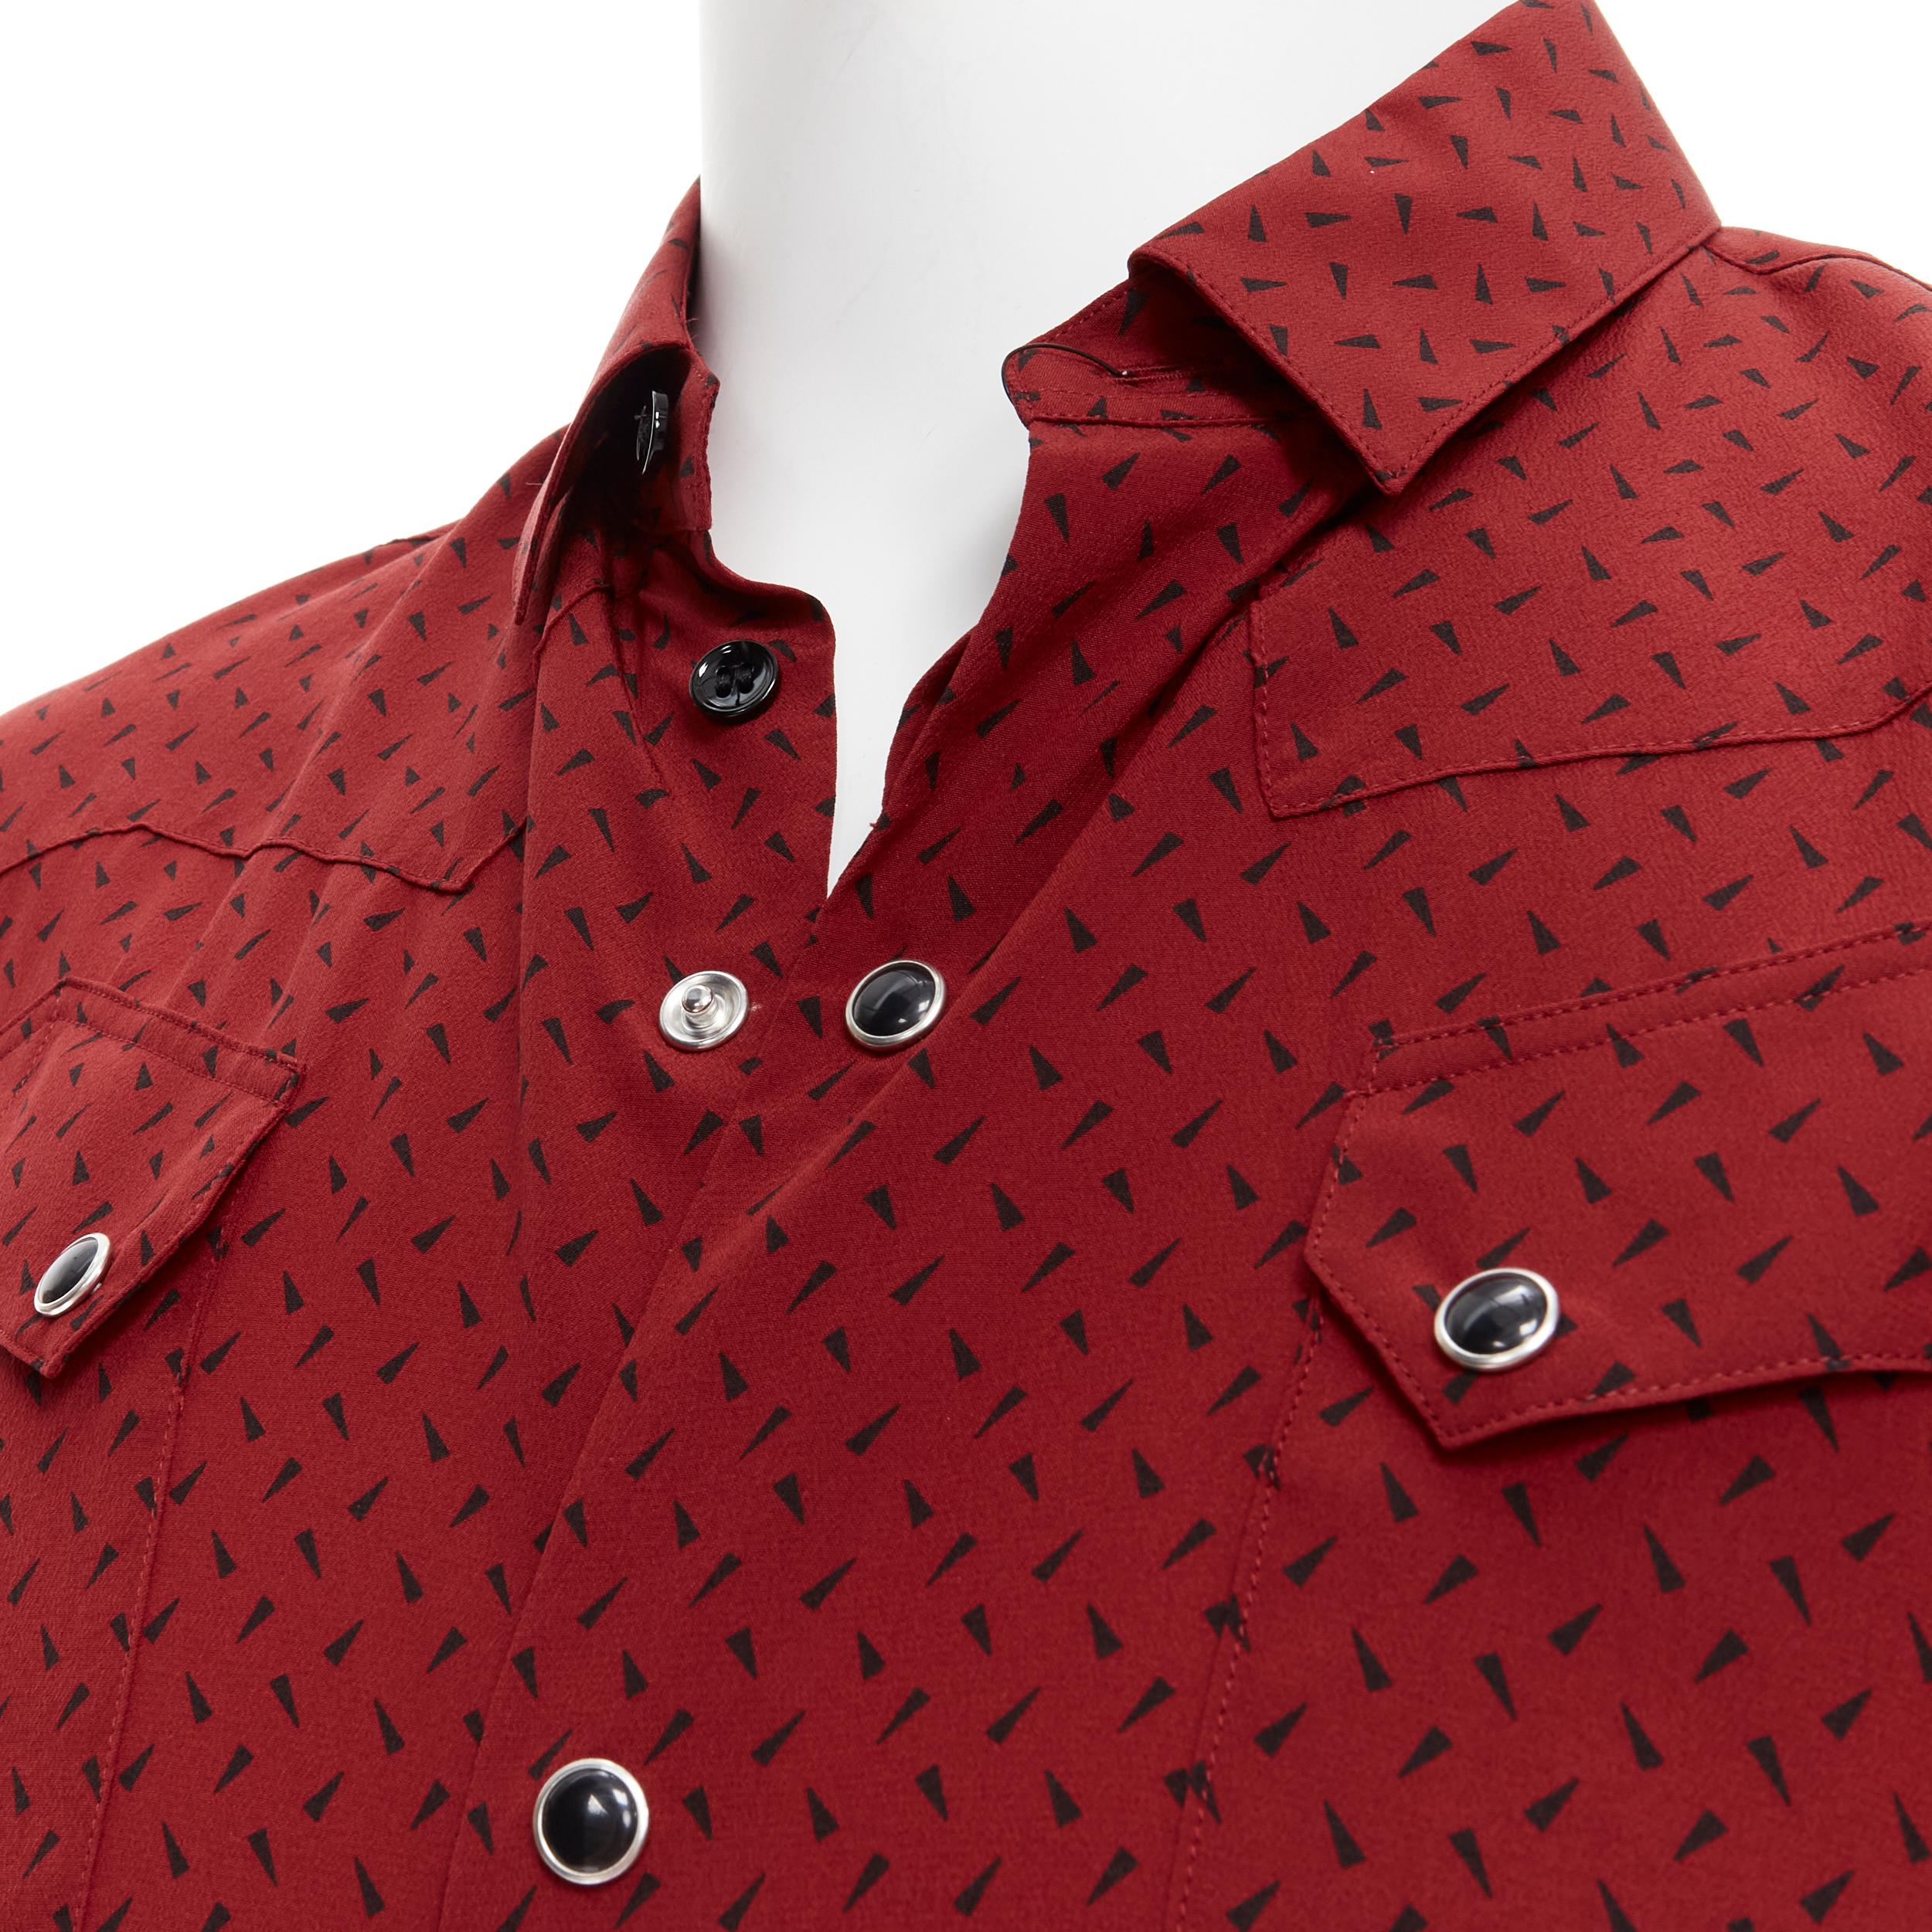 new SAINT LAURENT 2018 100% silk red black print western casual shirt EU39 M 
Reference: TGAS/B01739 
Brand: Saint Laurent 
Designer: Anthony Vaccarello 
Collection: 2018 
Material: Silk 
Color: Red 
Pattern: Abstract 
Closure: Button 
Extra Detail: